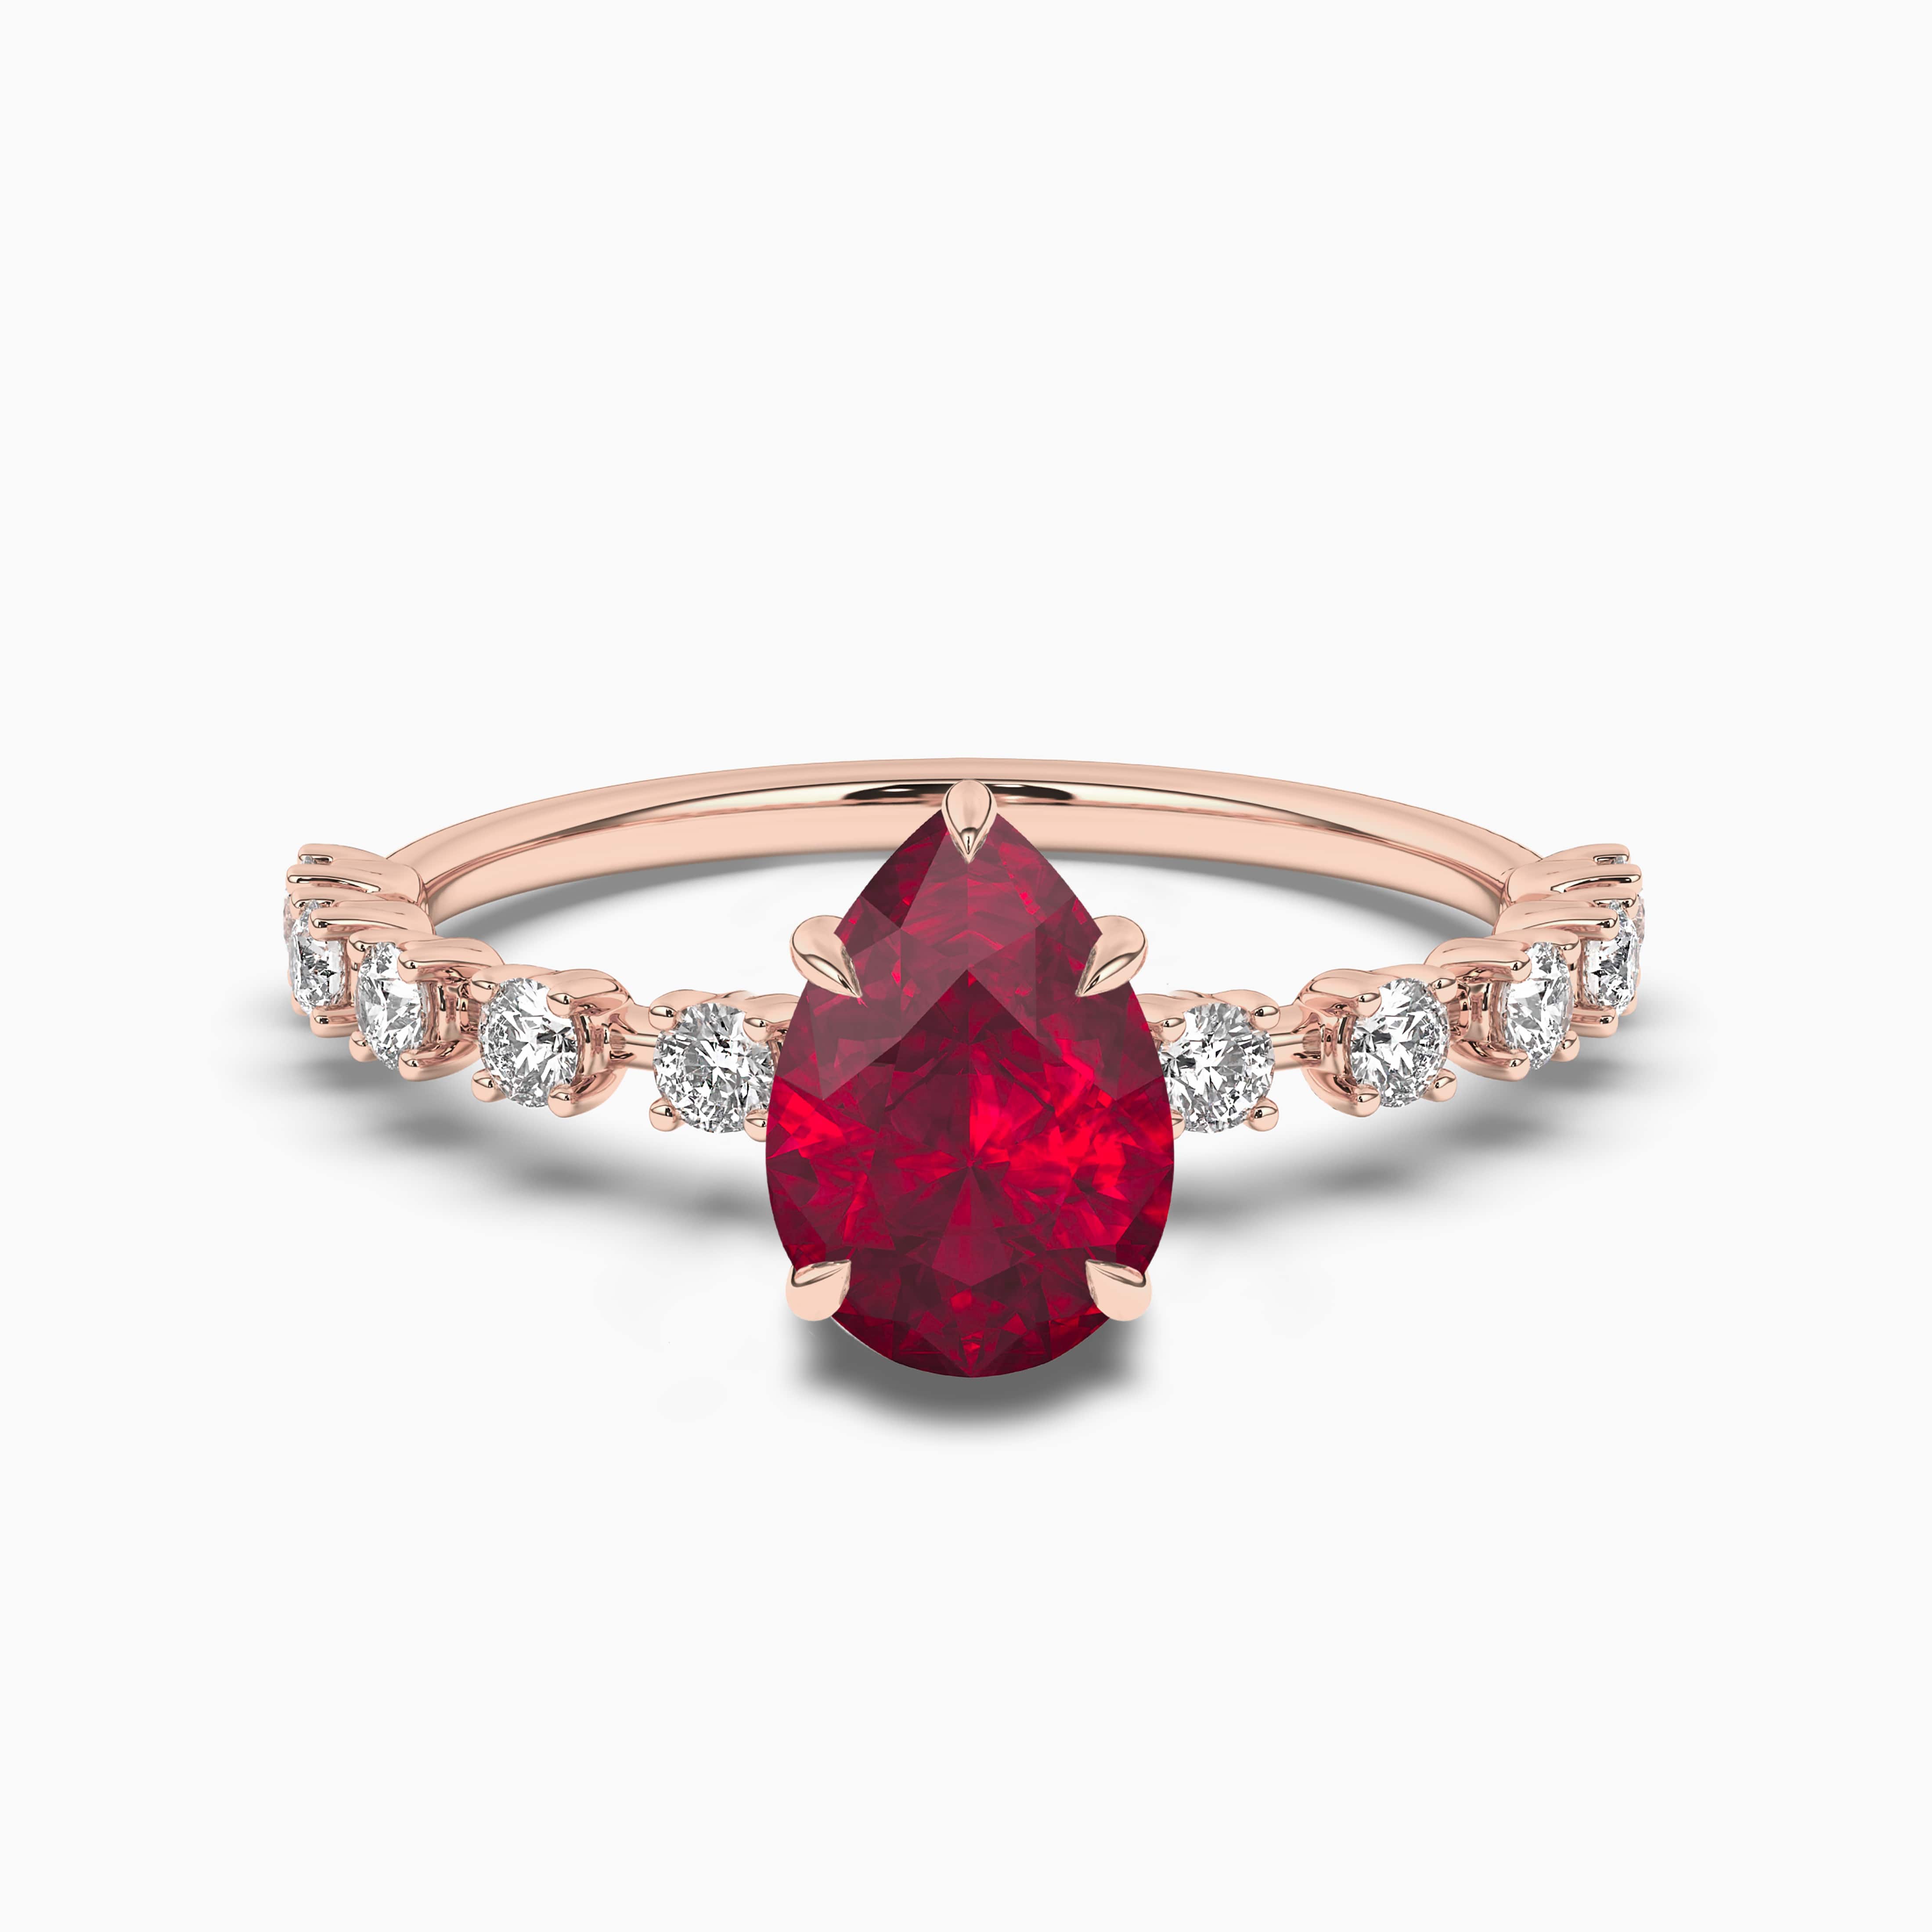 Pear shaped Ruby Engagement Ring, Pear Cut Unique Rose Gold Diamond